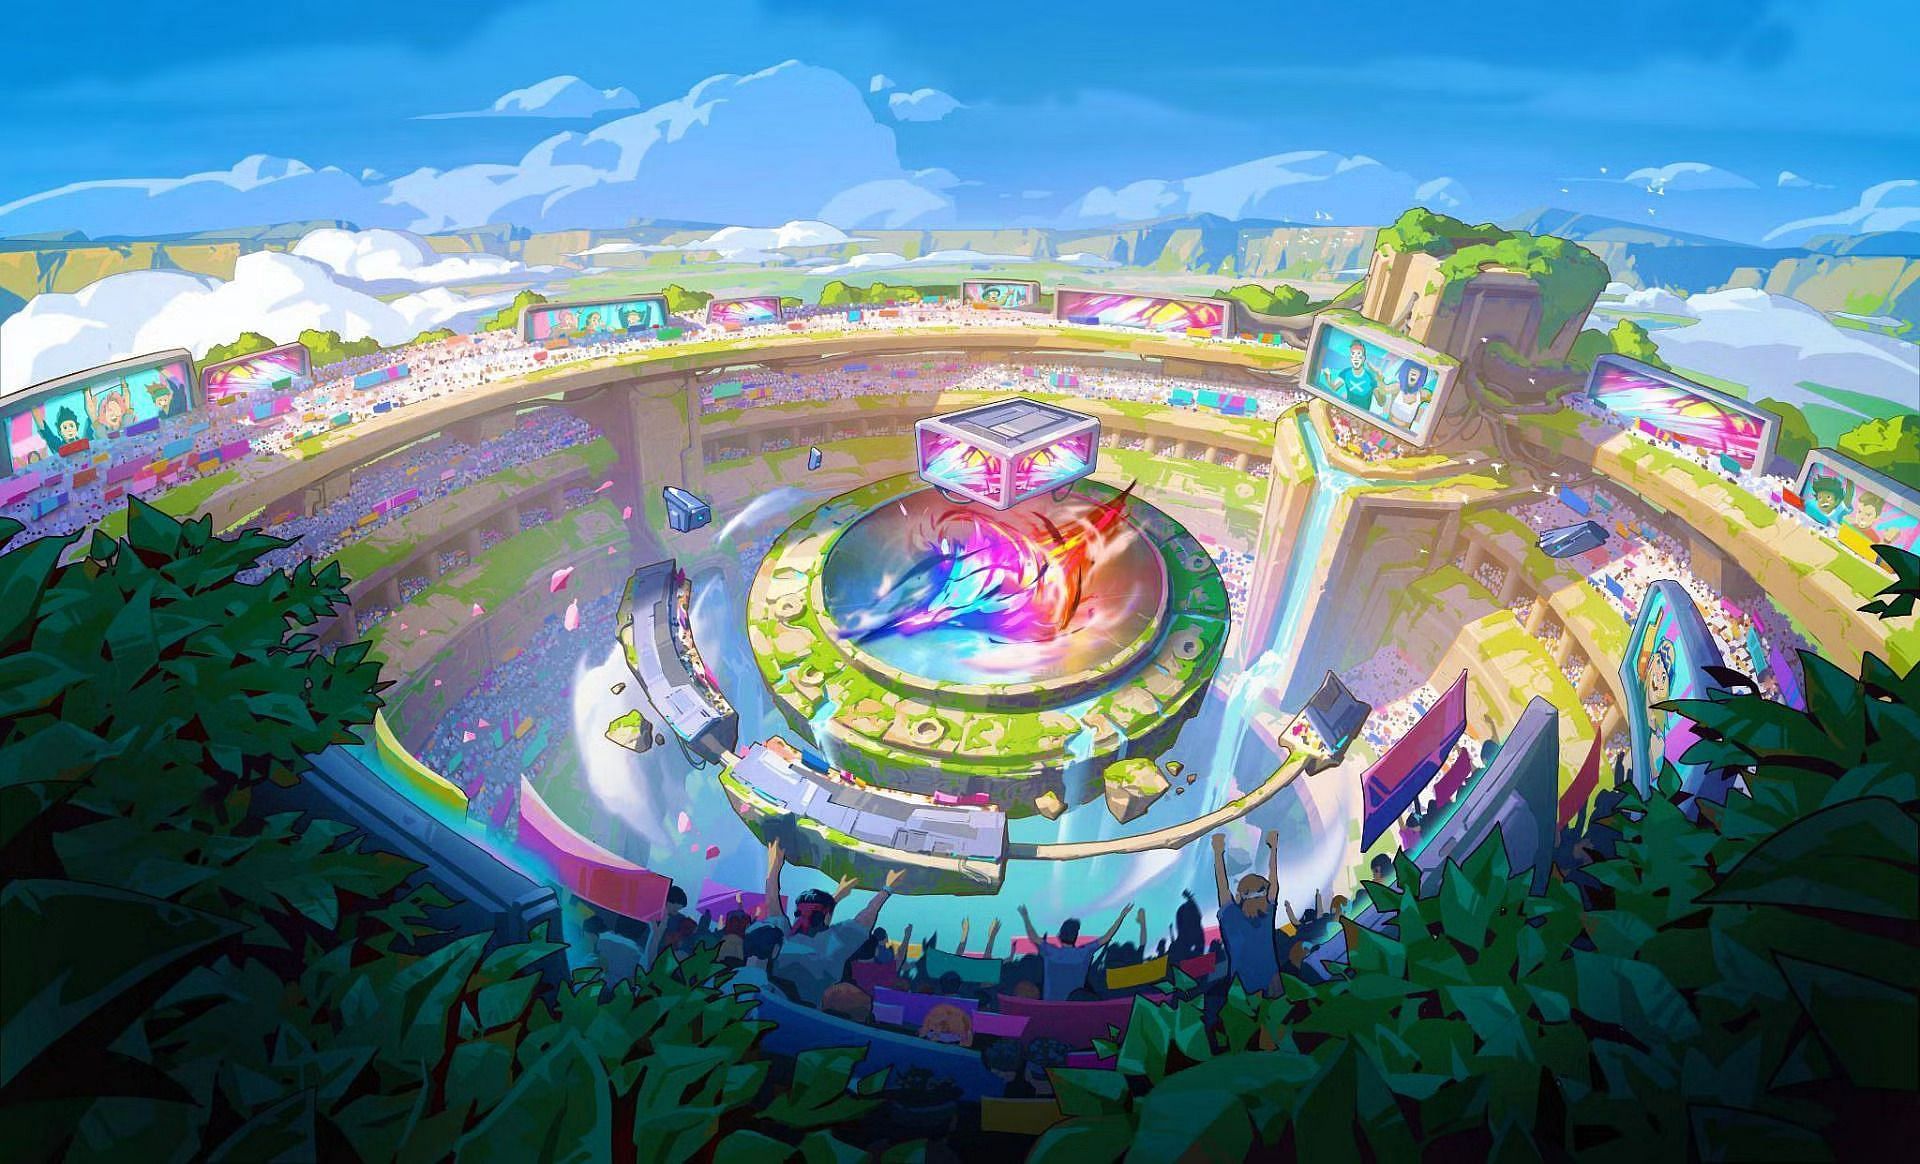 A look at the League of Legends: Arena (Image via Riot Games)